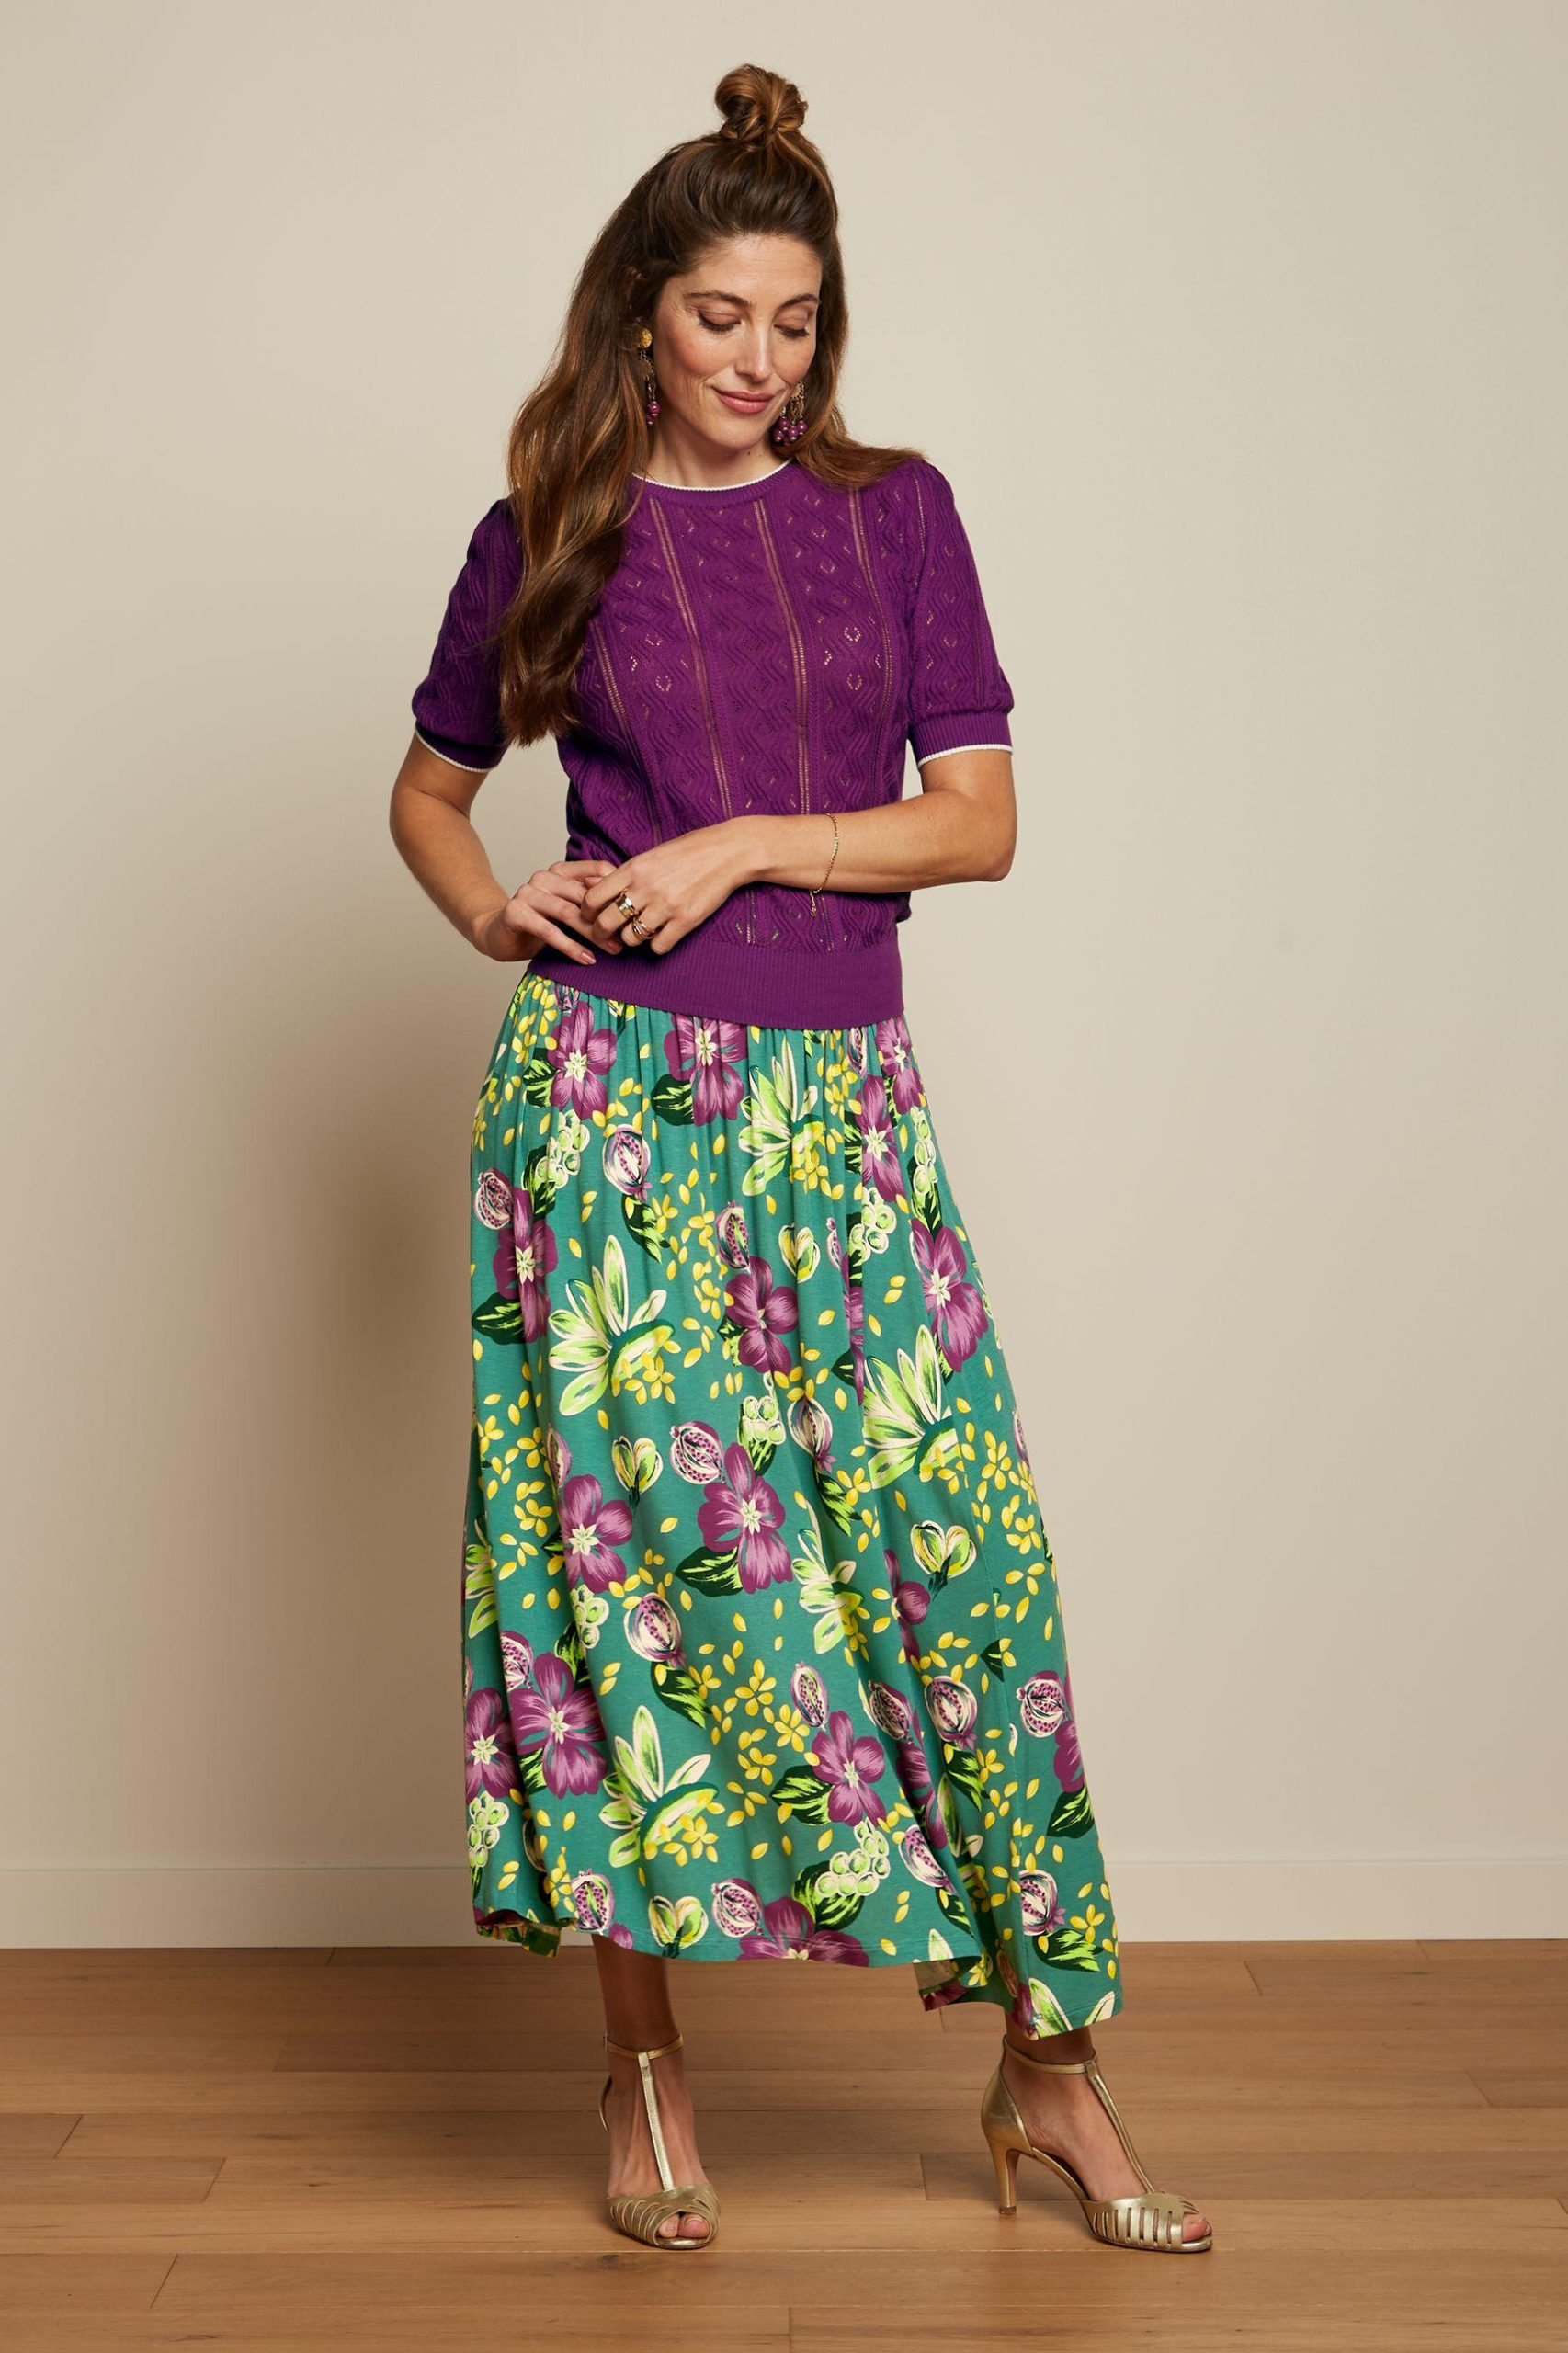 Agnes Puff Top Herrero purple with green floral skirt